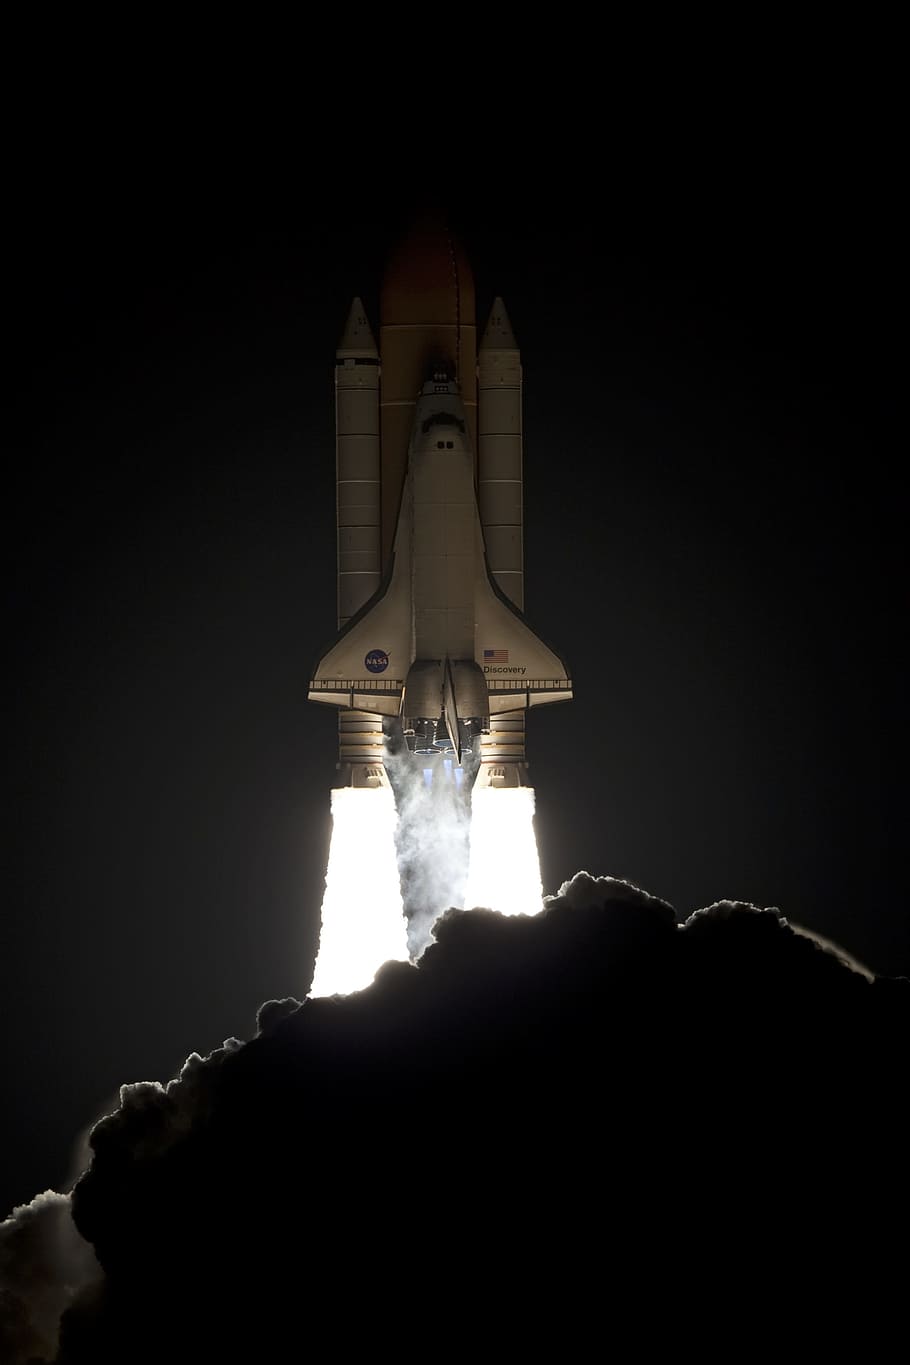 launch, liftoff, night, space shuttle, discovery, spaceship